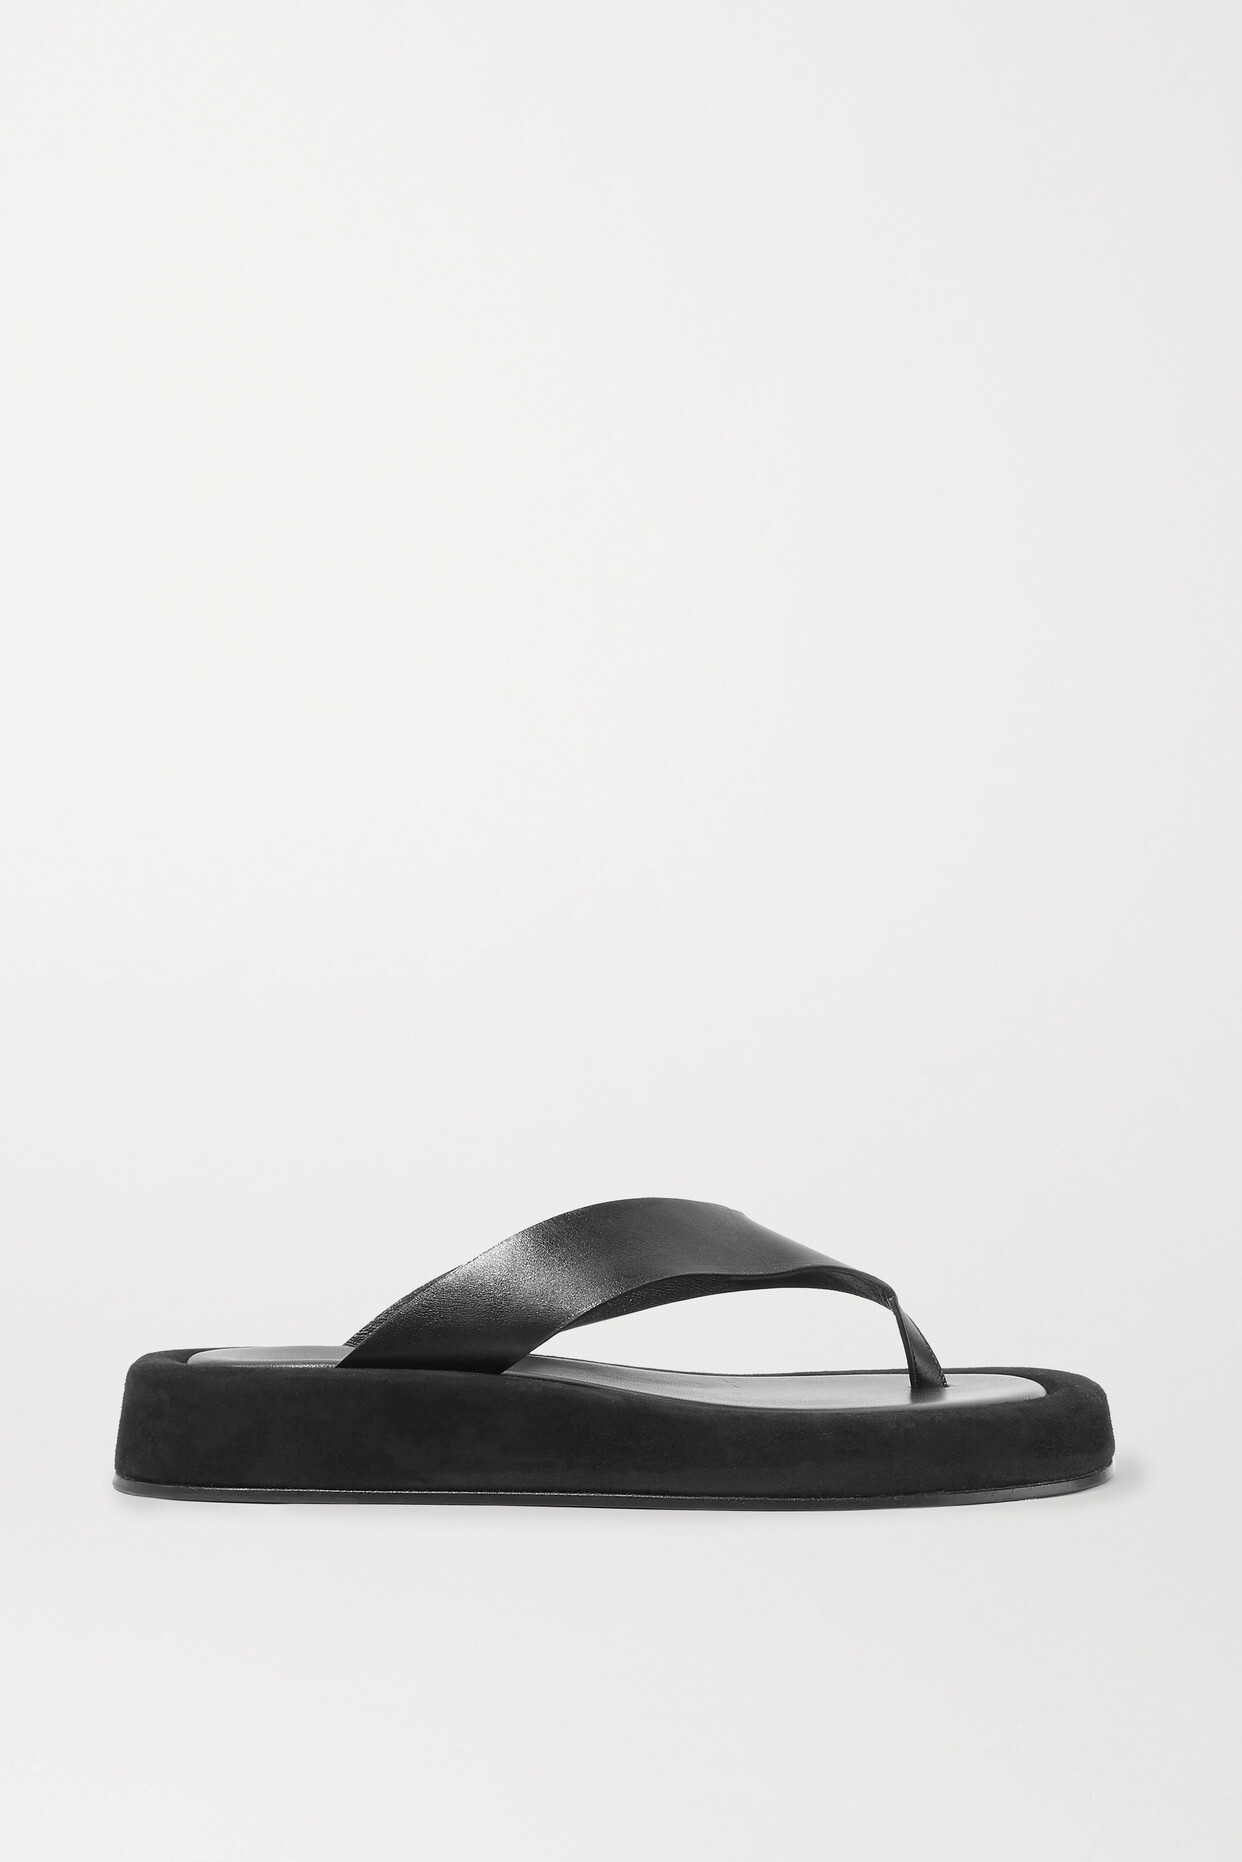 The Row - Ginza Leather And Suede Platform Flip Flops - Black